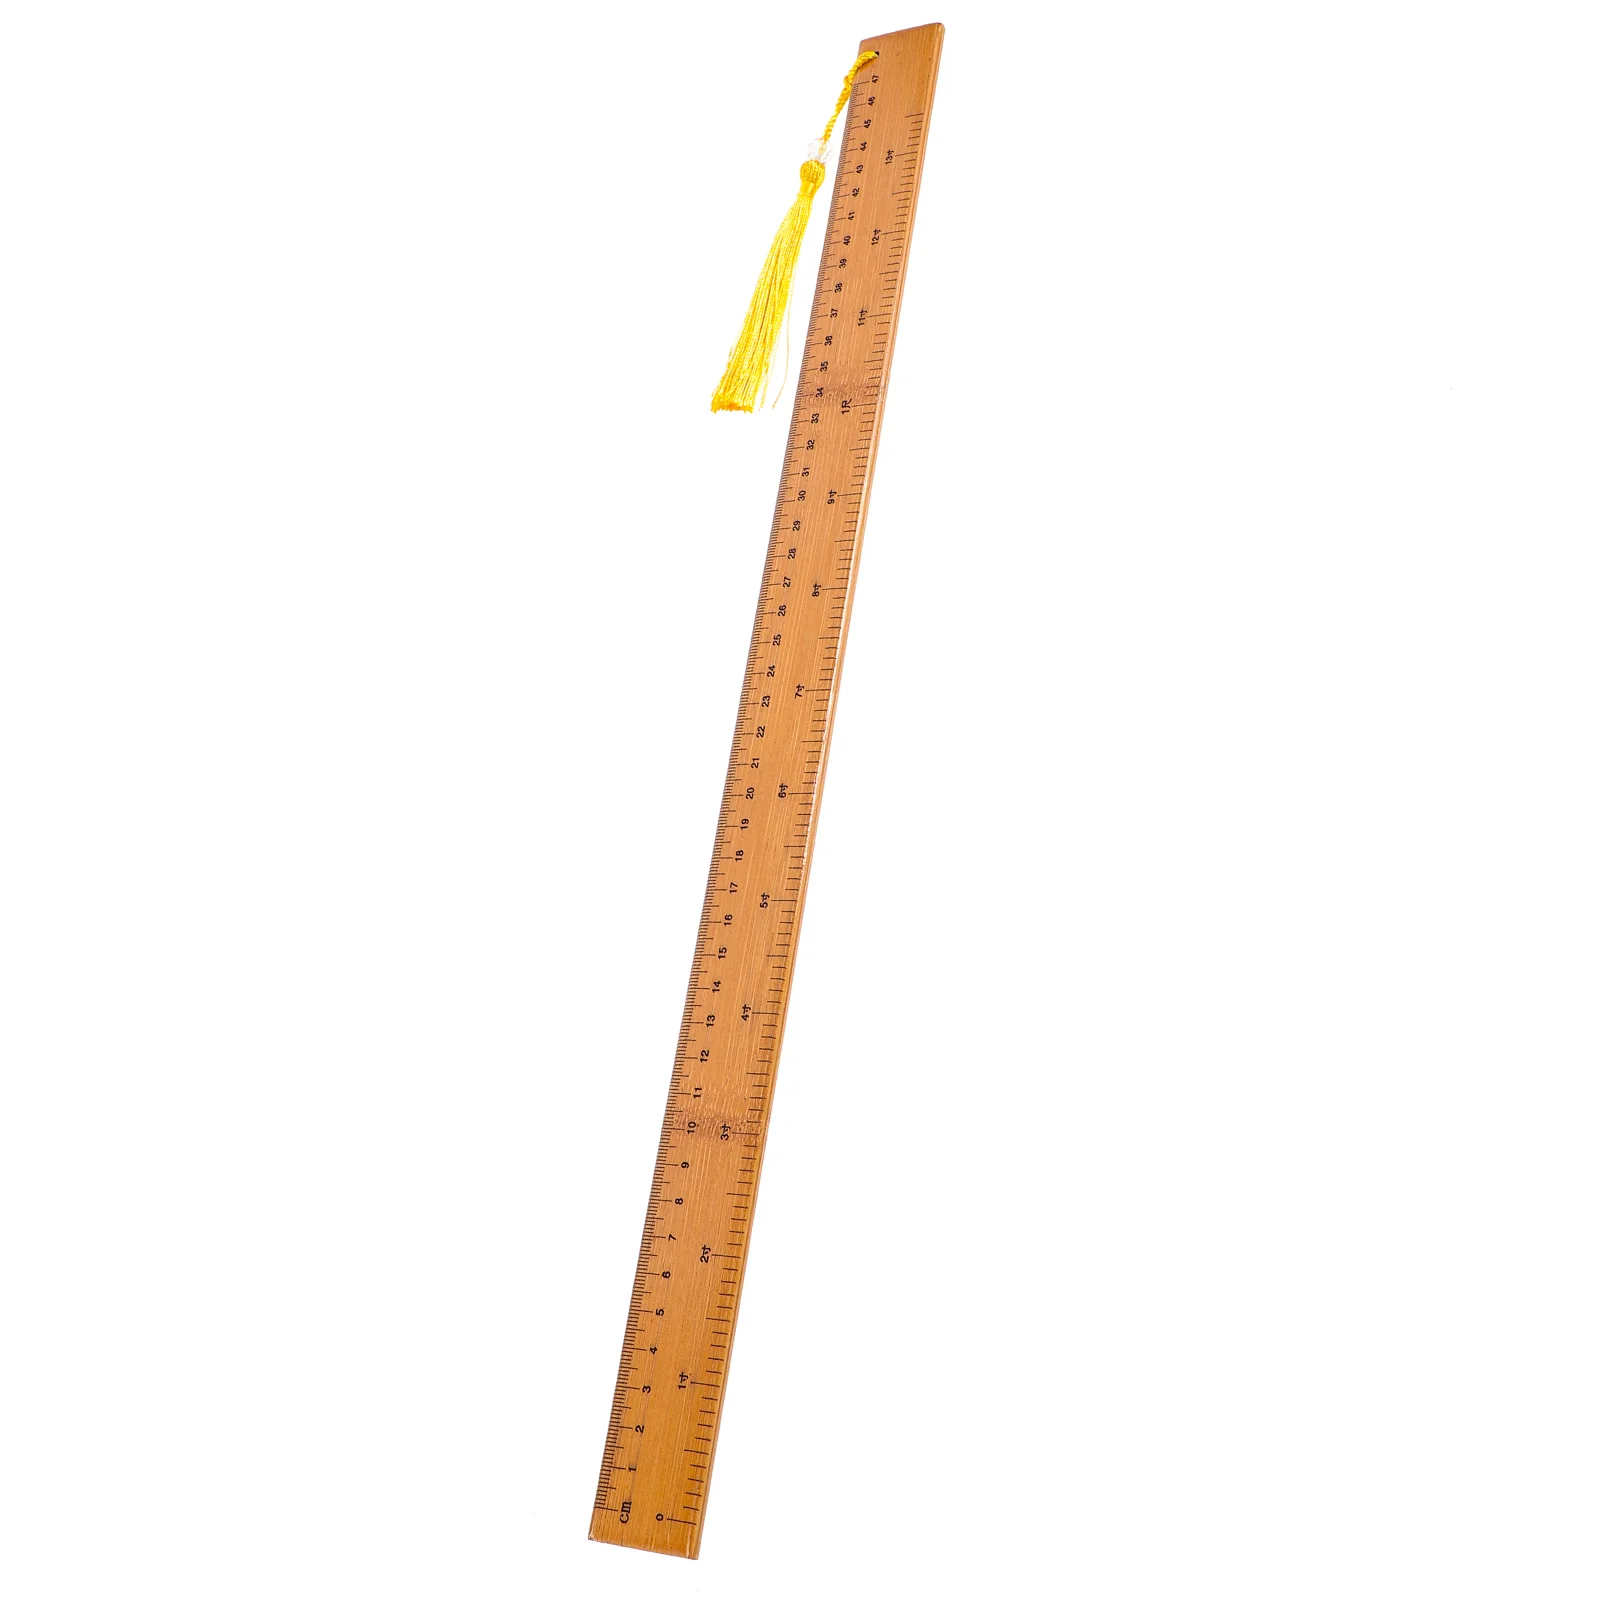 Household Straight Ruler Kids Ruler Measuring Bamboo Ruler Precise Student Ruler School Accessory Kids School Teaching Home 2 in1 soil detector humidity ph meter with 2 probes soil humidometer probe watering tester home garden measuring tool